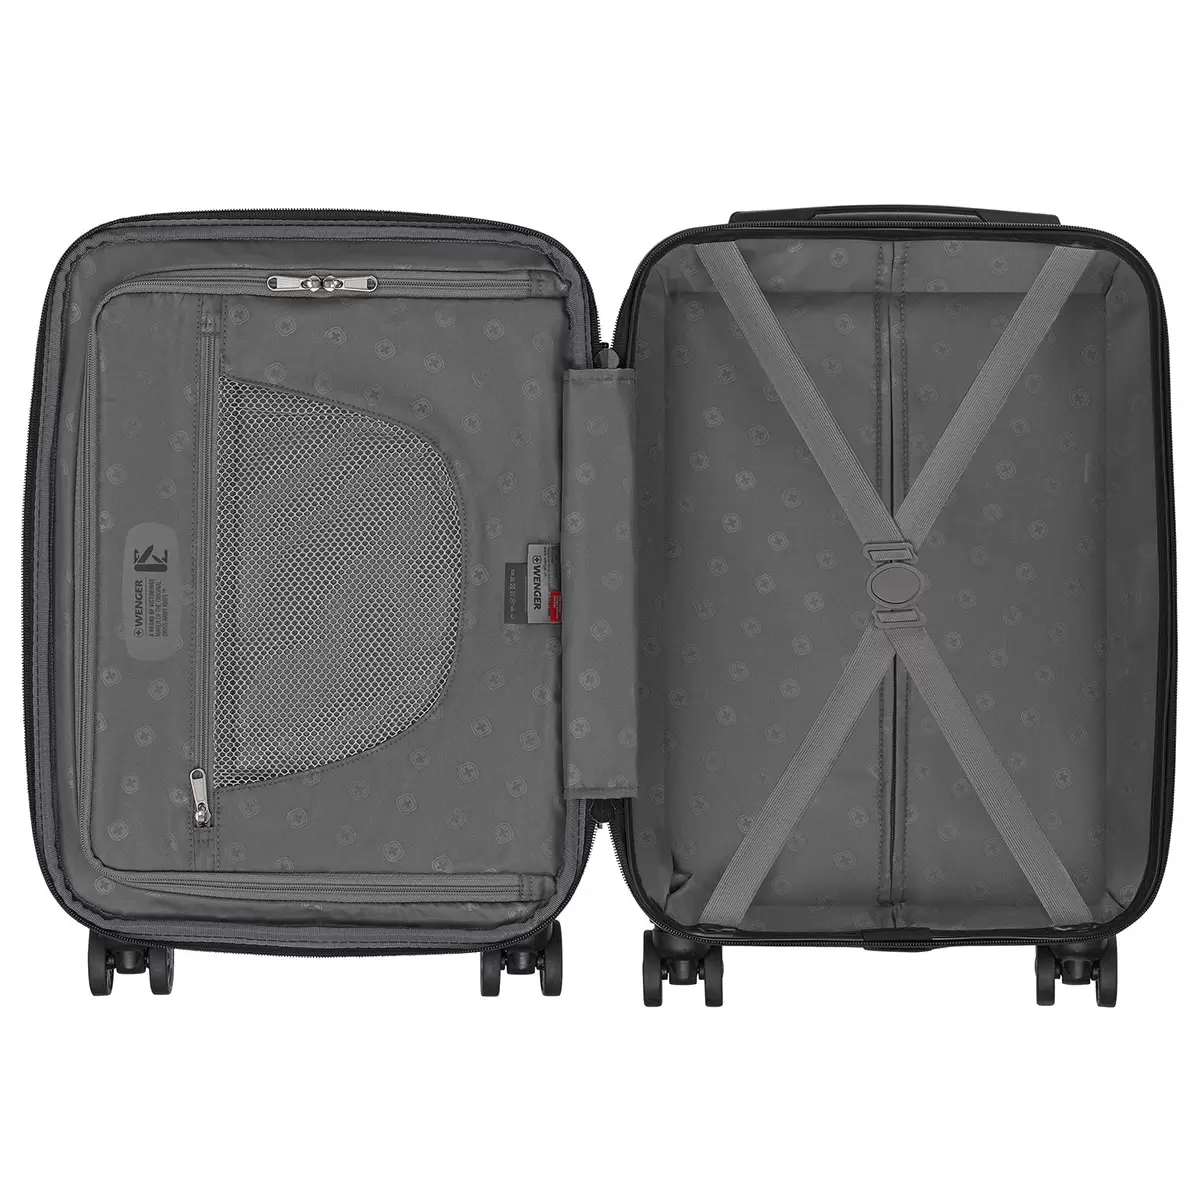 Wenger Latitude 3 Piece Travel Collection Sand